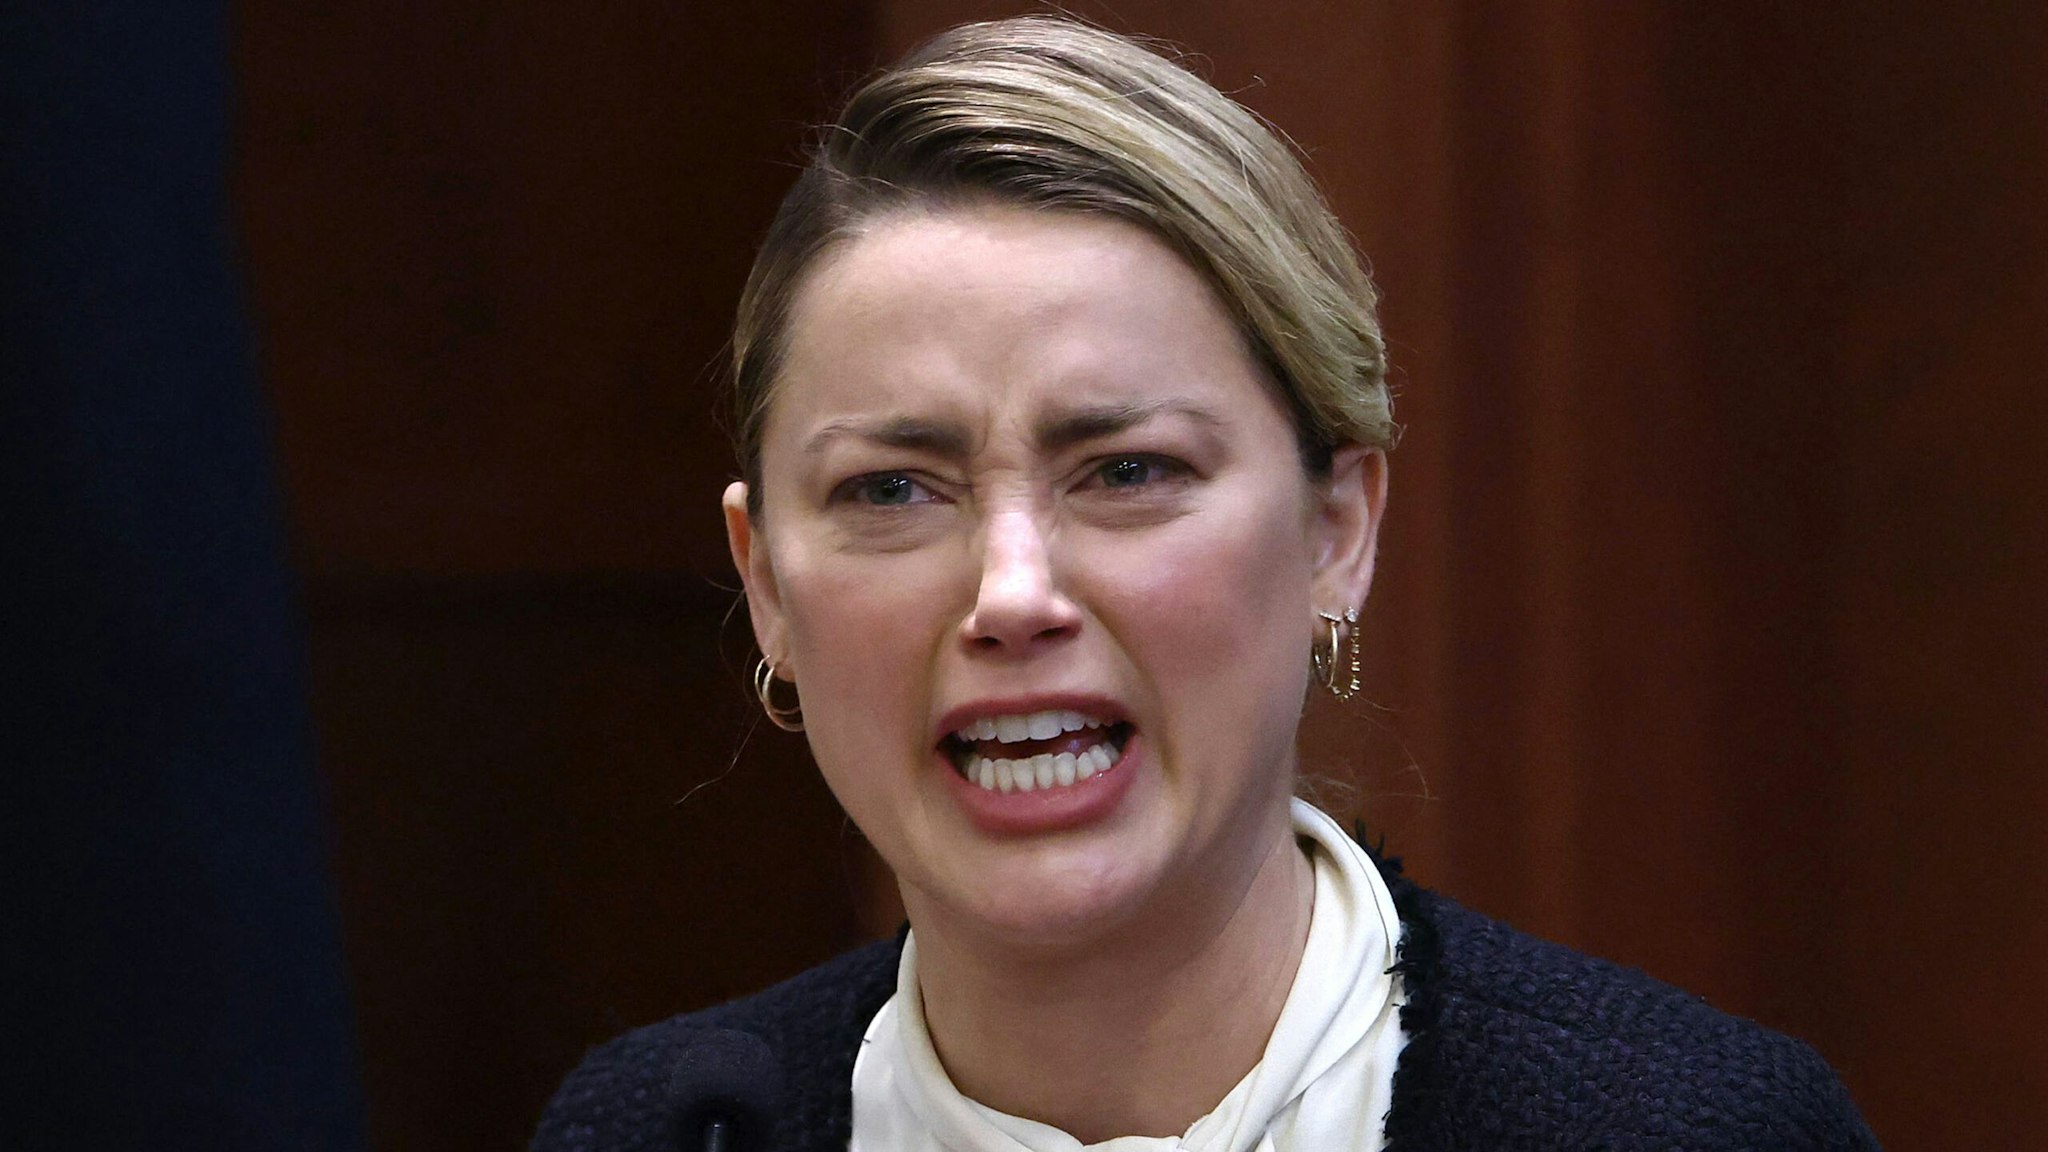 US actress Amber Heard testifies at the Fairfax County Circuit Courthouse in Fairfax, Virginia, on May 5, 2022. - Actor Johnny Depp is suing ex-wife Amber Heard for libel after she wrote an op-ed piece in The Washington Post in 2018 referring to herself as a public figure representing domestic abuse.